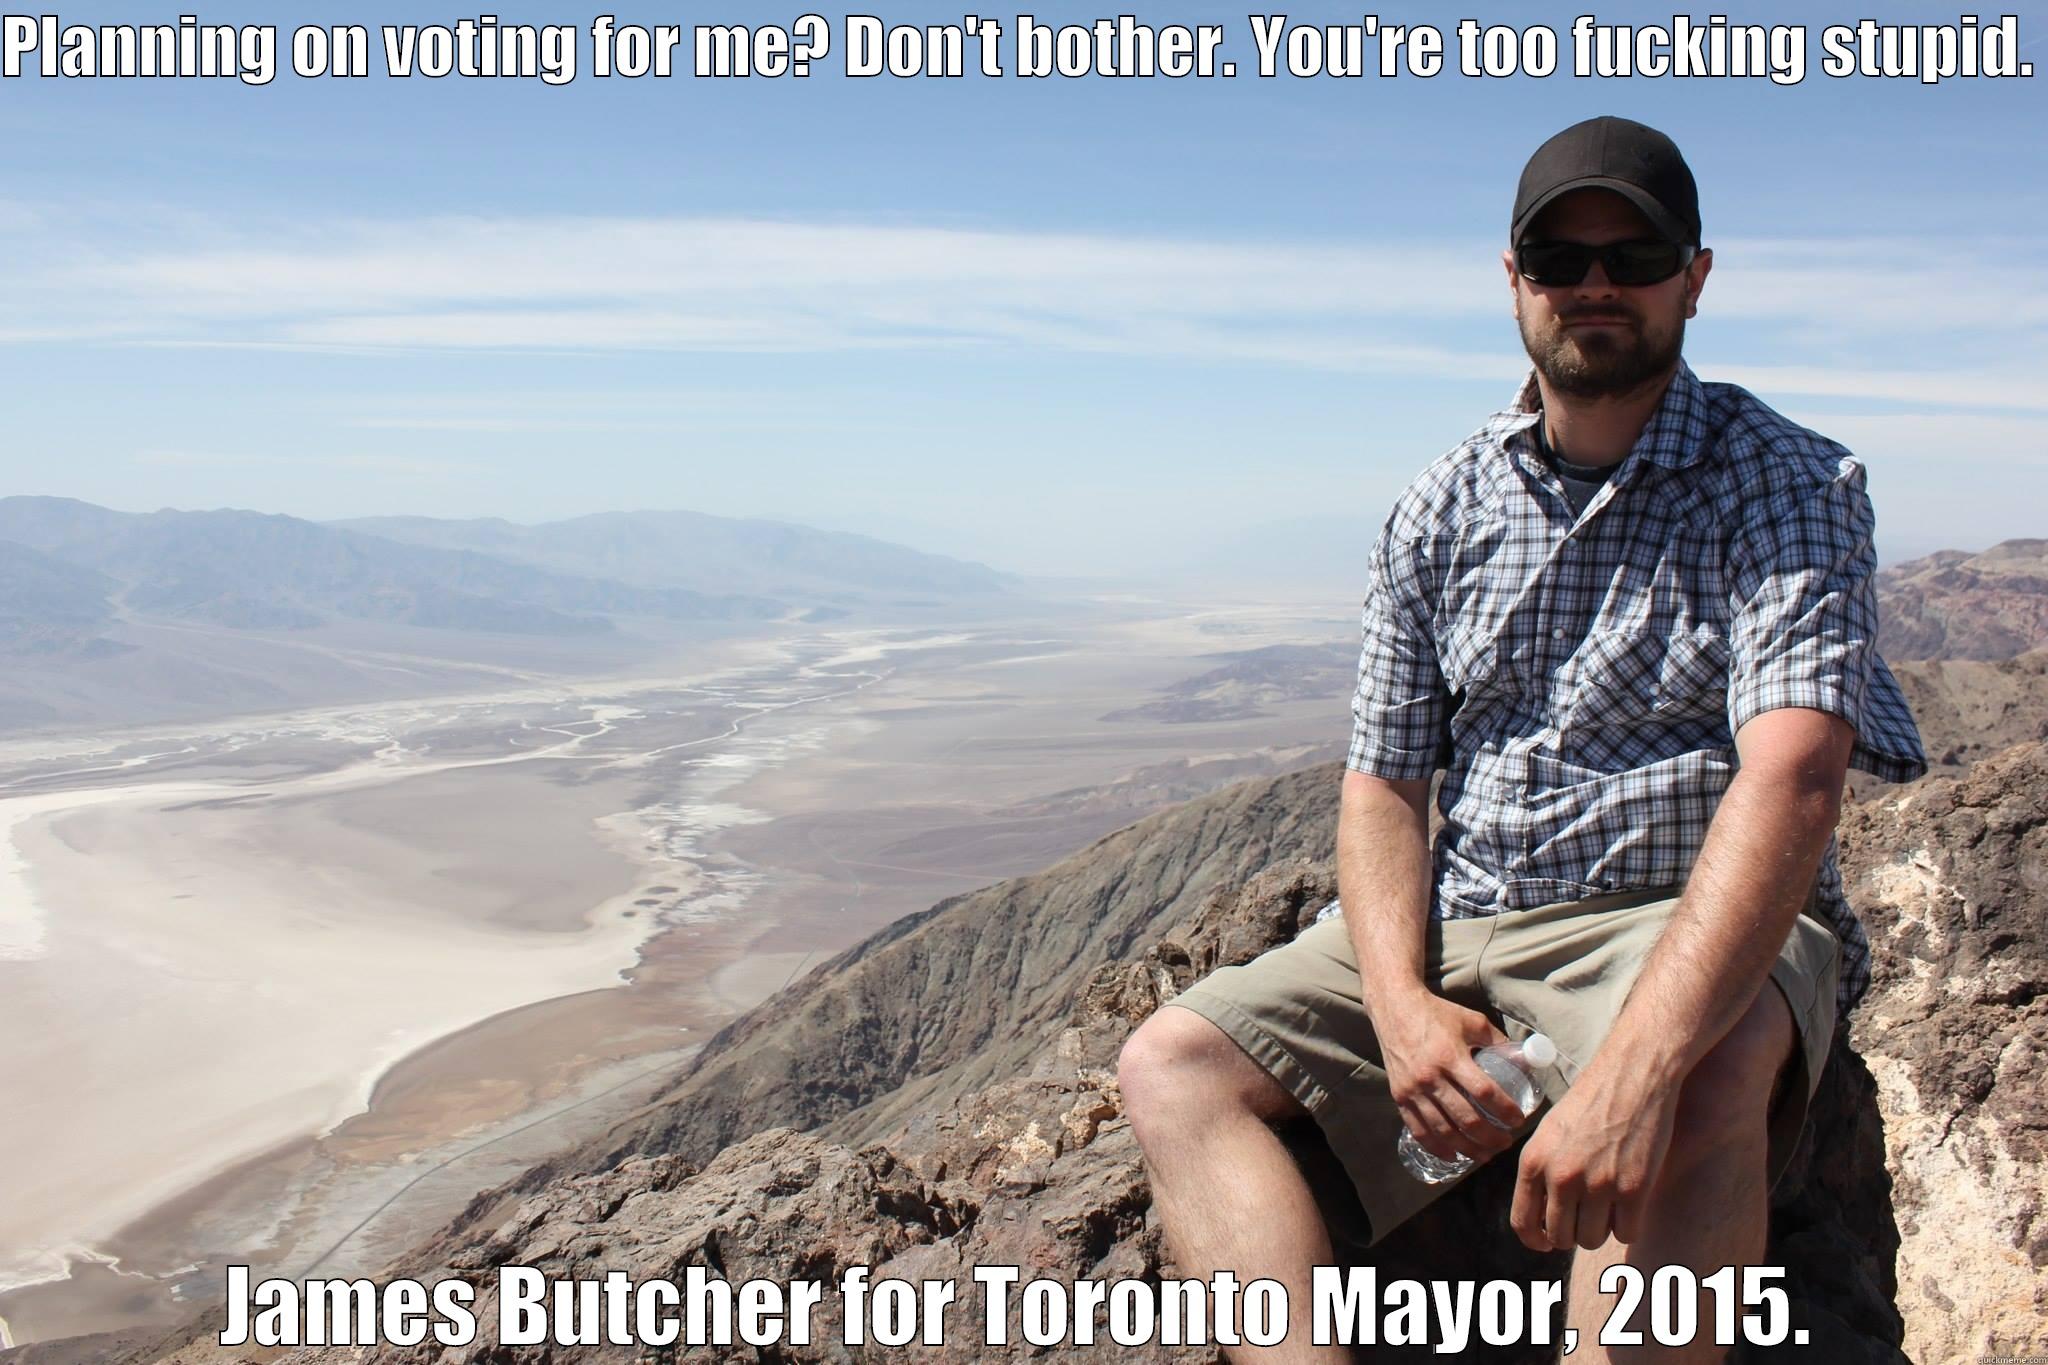 Campaign Ad.  - PLANNING ON VOTING FOR ME? DON'T BOTHER. YOU'RE TOO FUCKING STUPID.  JAMES BUTCHER FOR TORONTO MAYOR, 2015. Misc